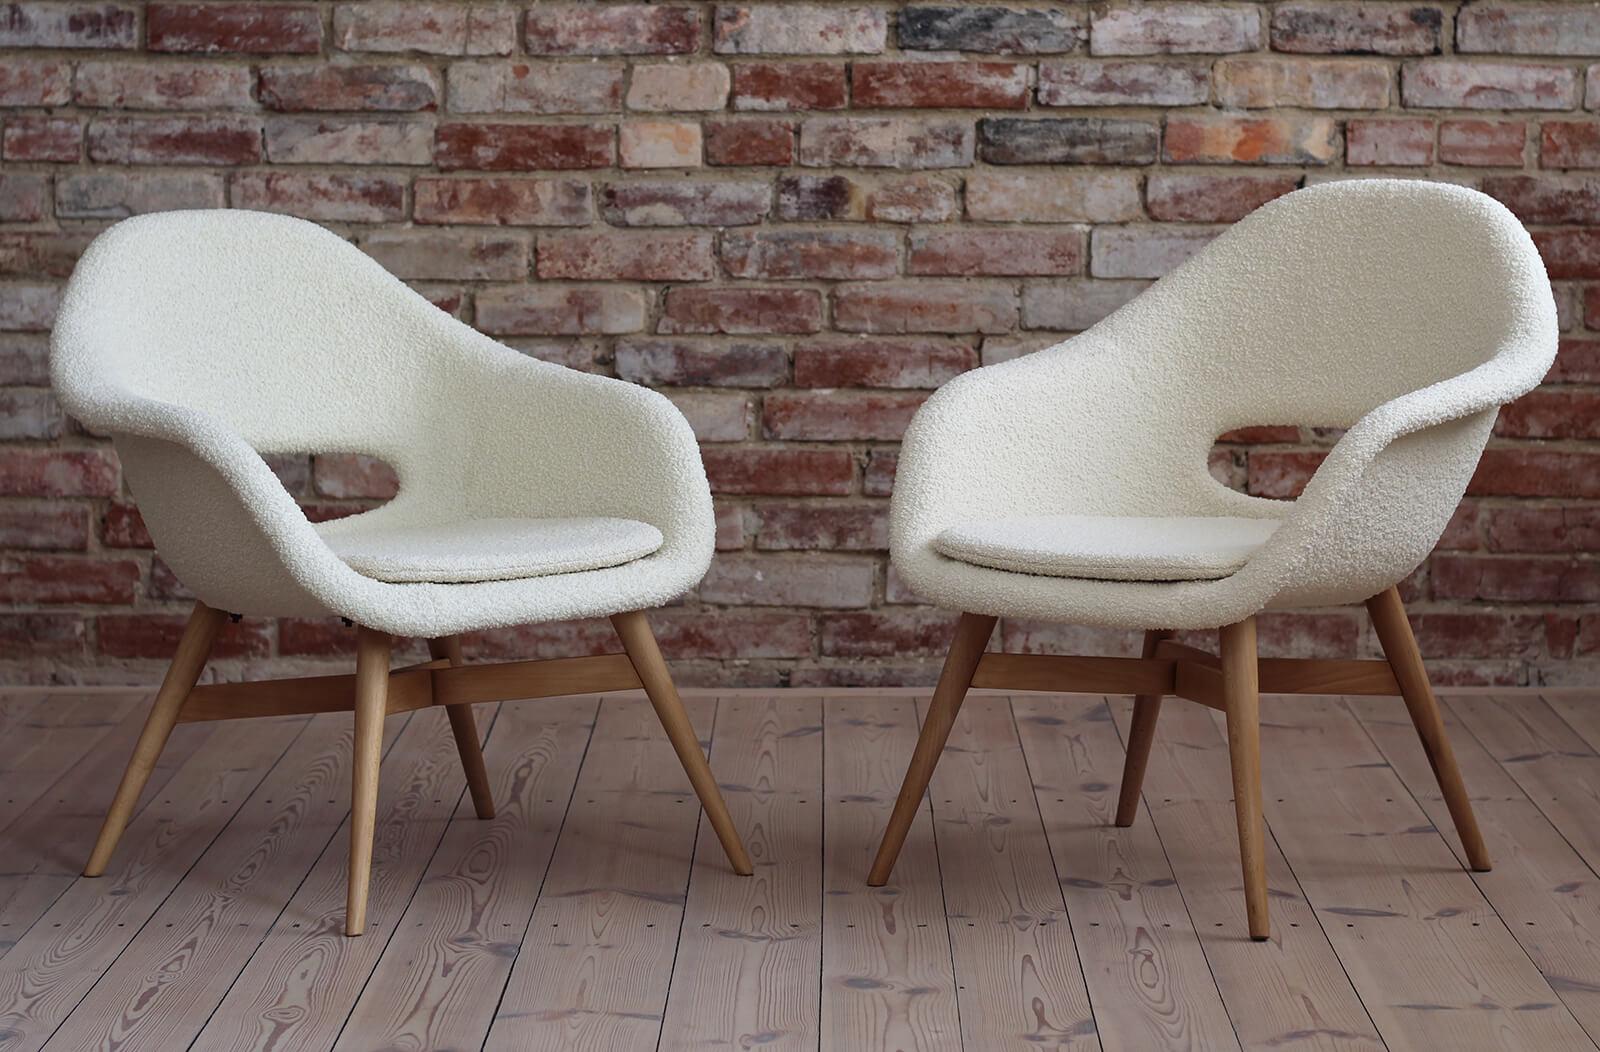 This set of 2 lounge chairs was designed in 1950s by Miroslav Navrátil in Czech Republic. It features a fiberglass seating shell and a wooden base. The piece has been renovated and reupholstered with French boucle fabric from Bisson Bruneel brand